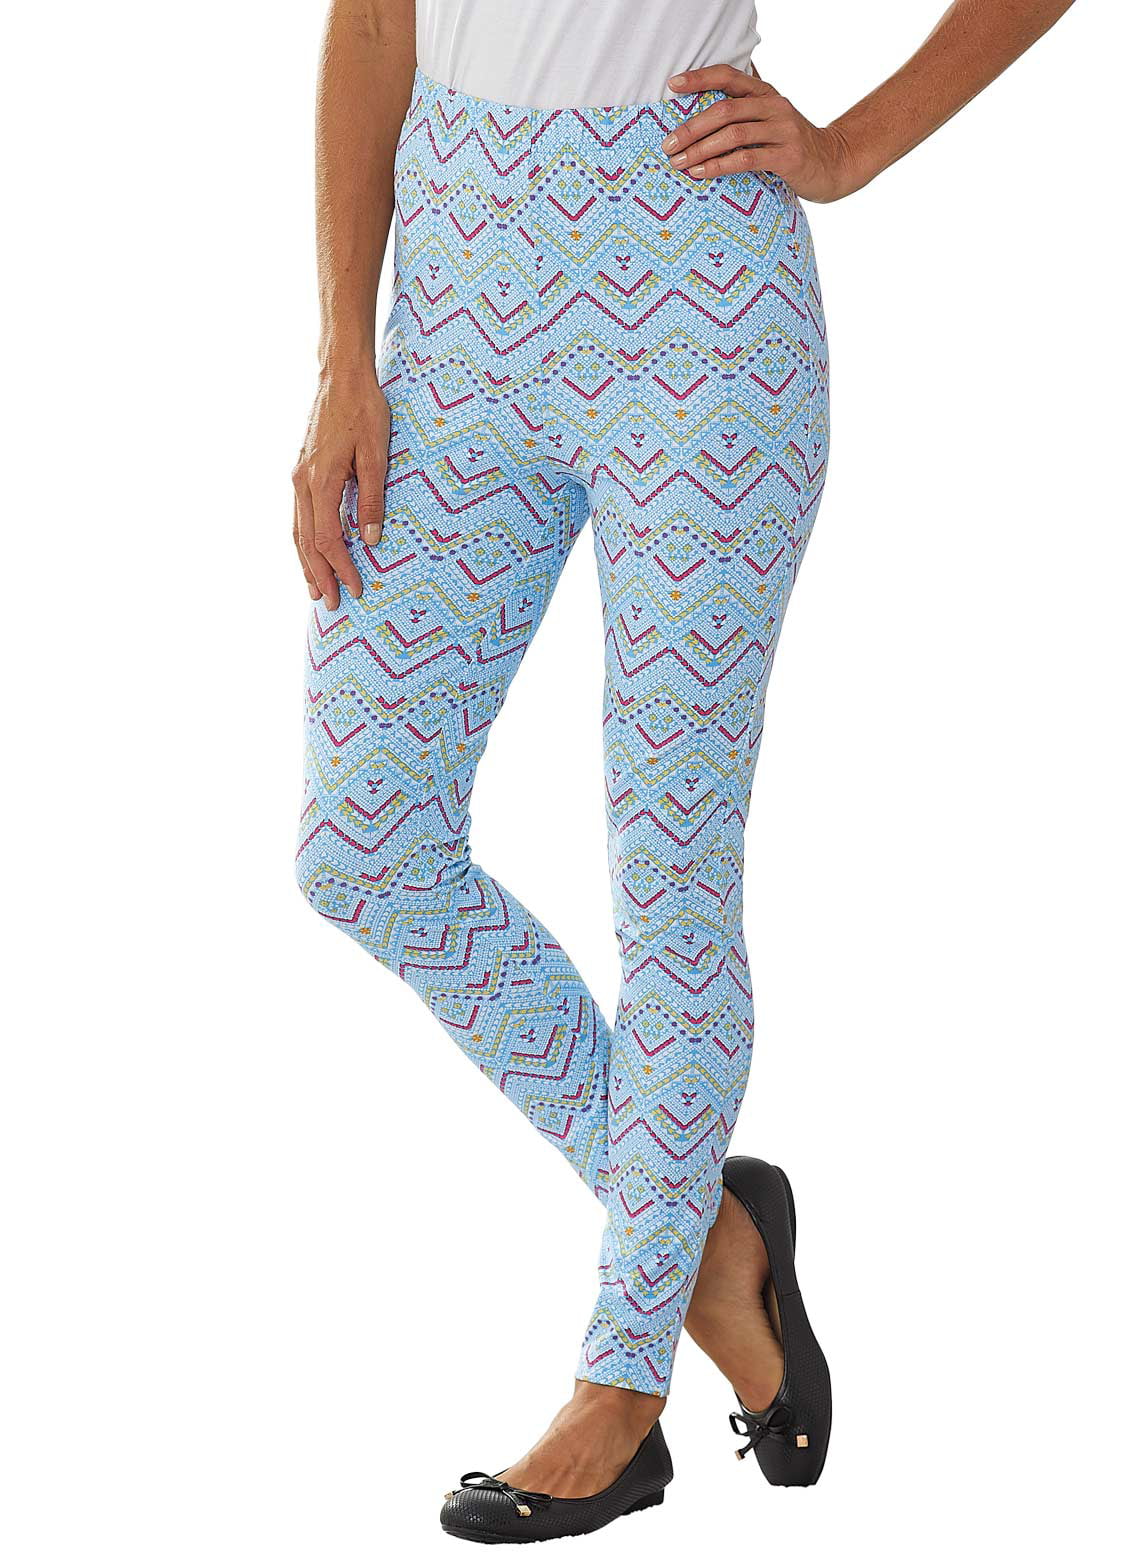 Basic Leggings In Solids & Prints by Easy Essentials 